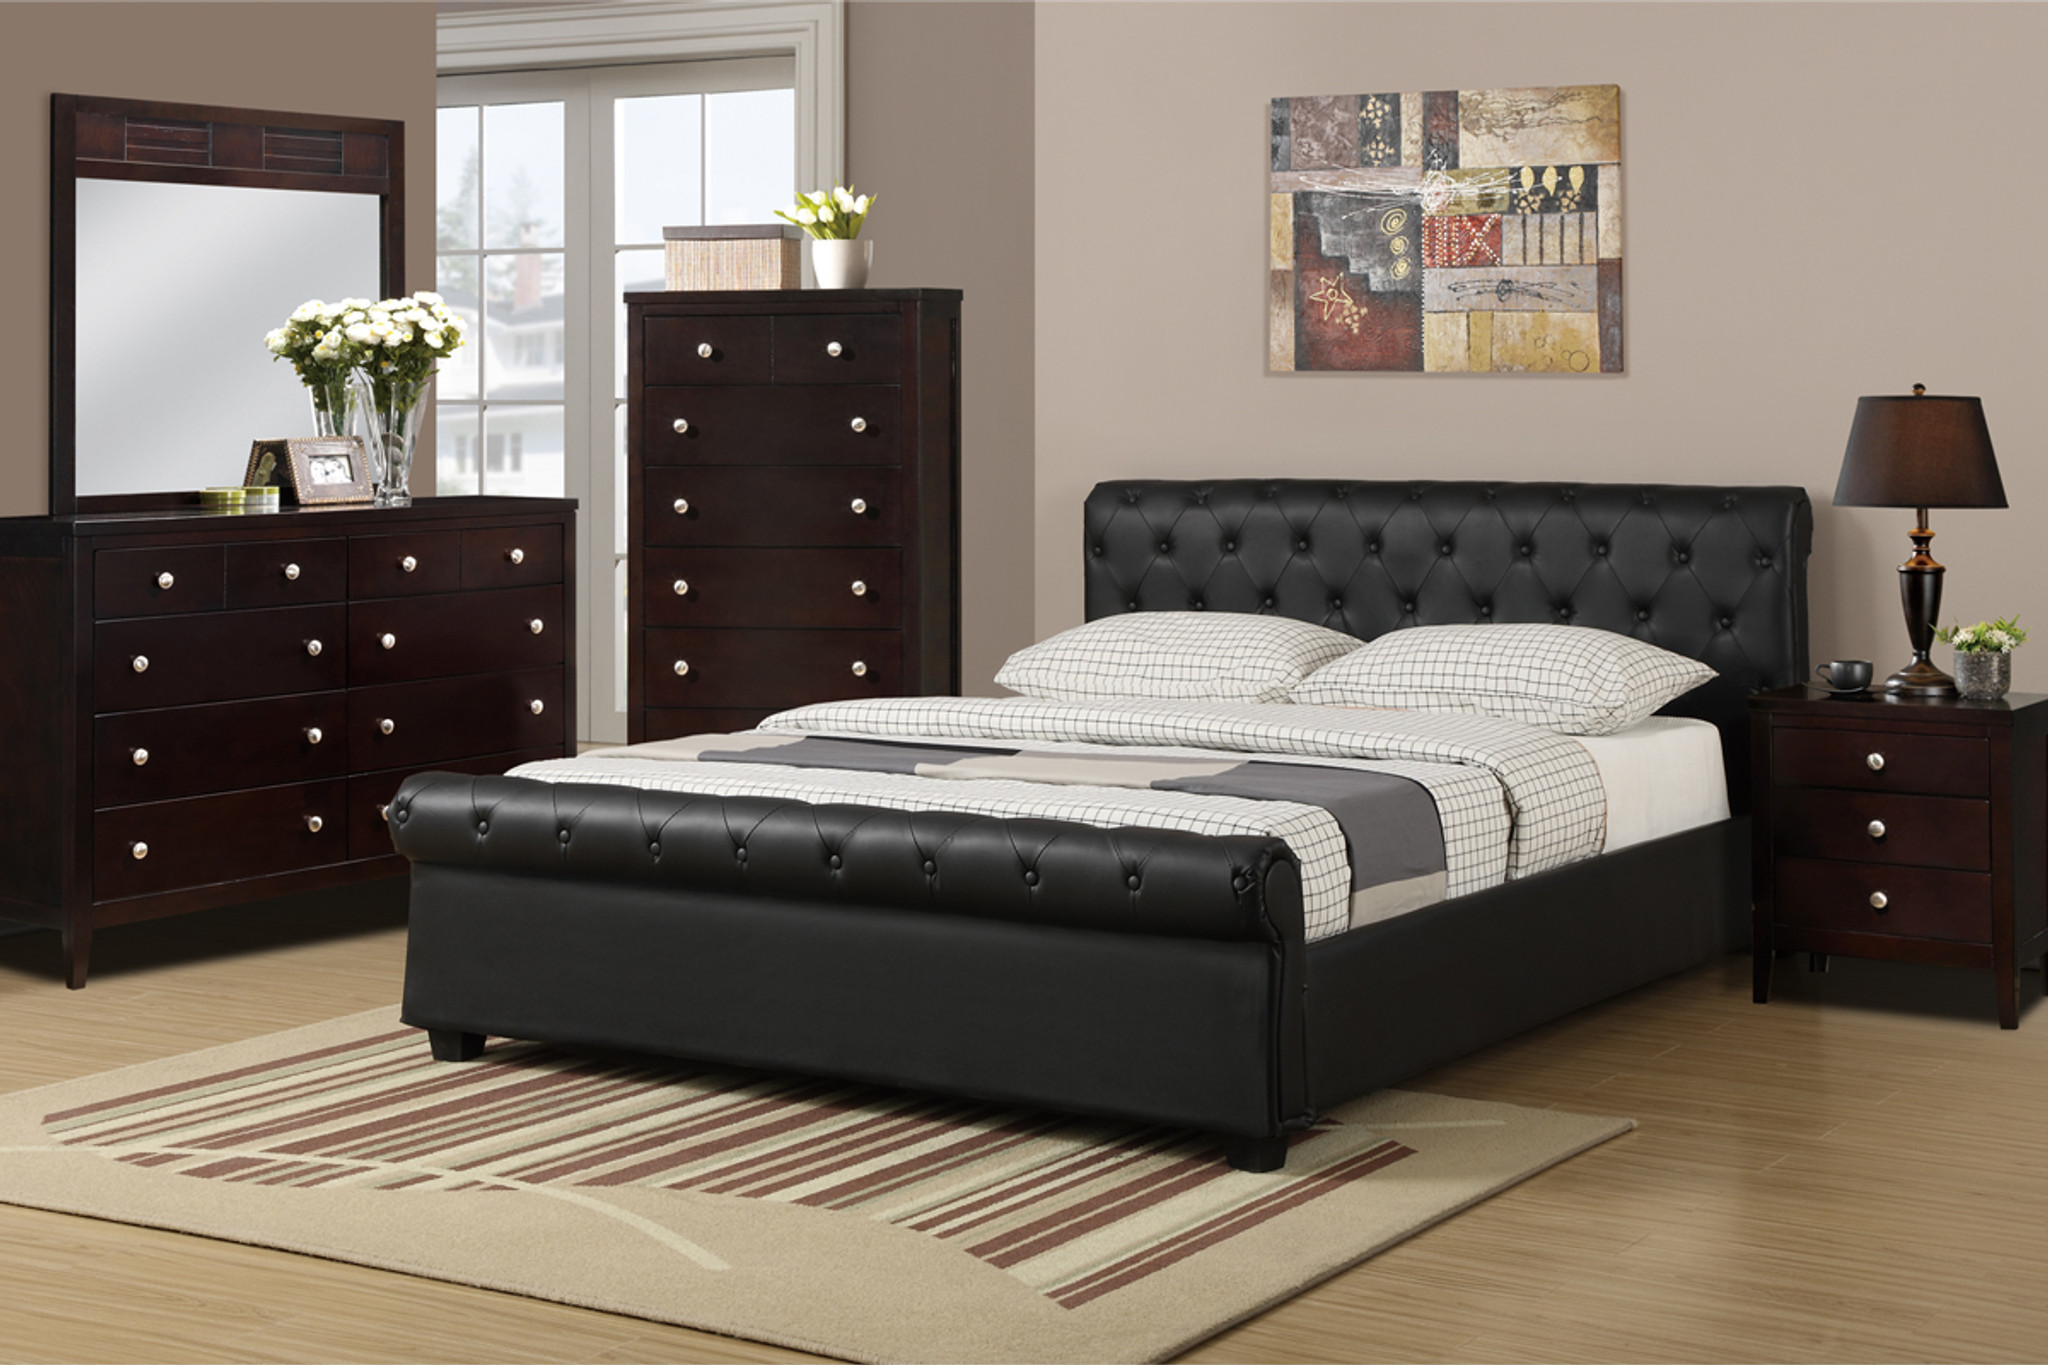 Kassa Mall Home Furniture F9246f Q Accented Full Queen Size